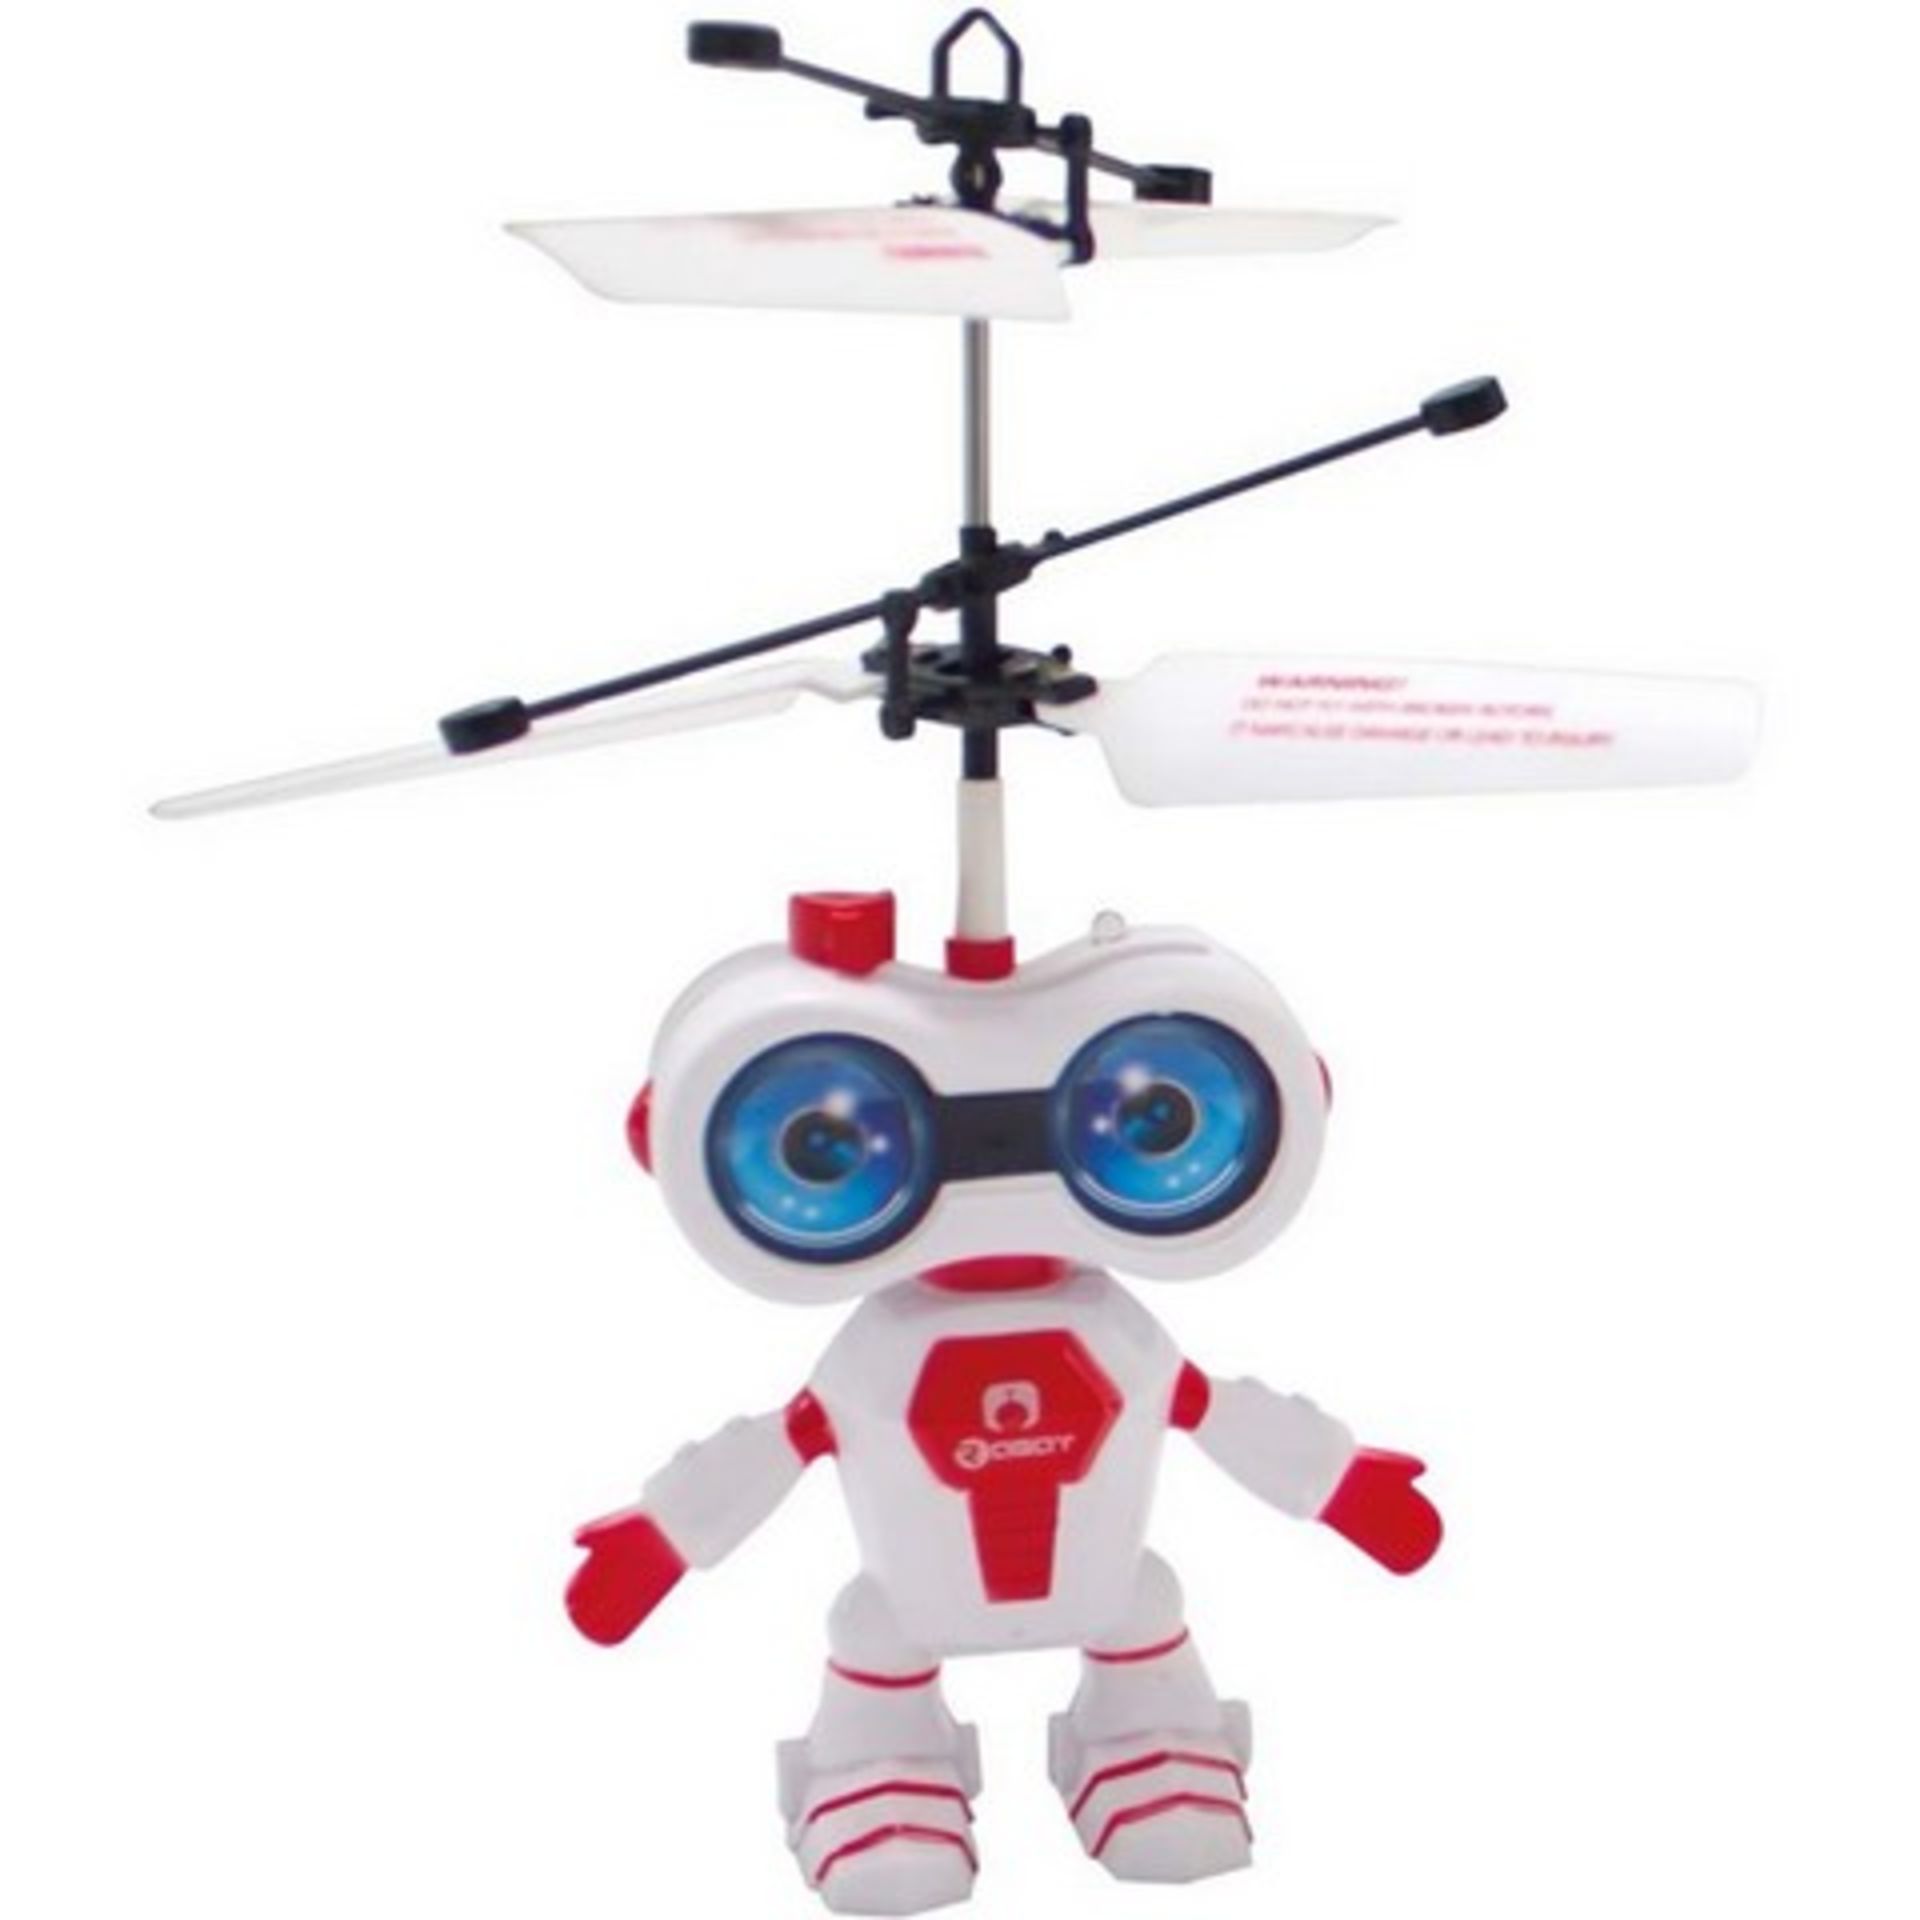 V Brand New R/C Robot with Sensor - Can sense hand below and move and keep away from objects